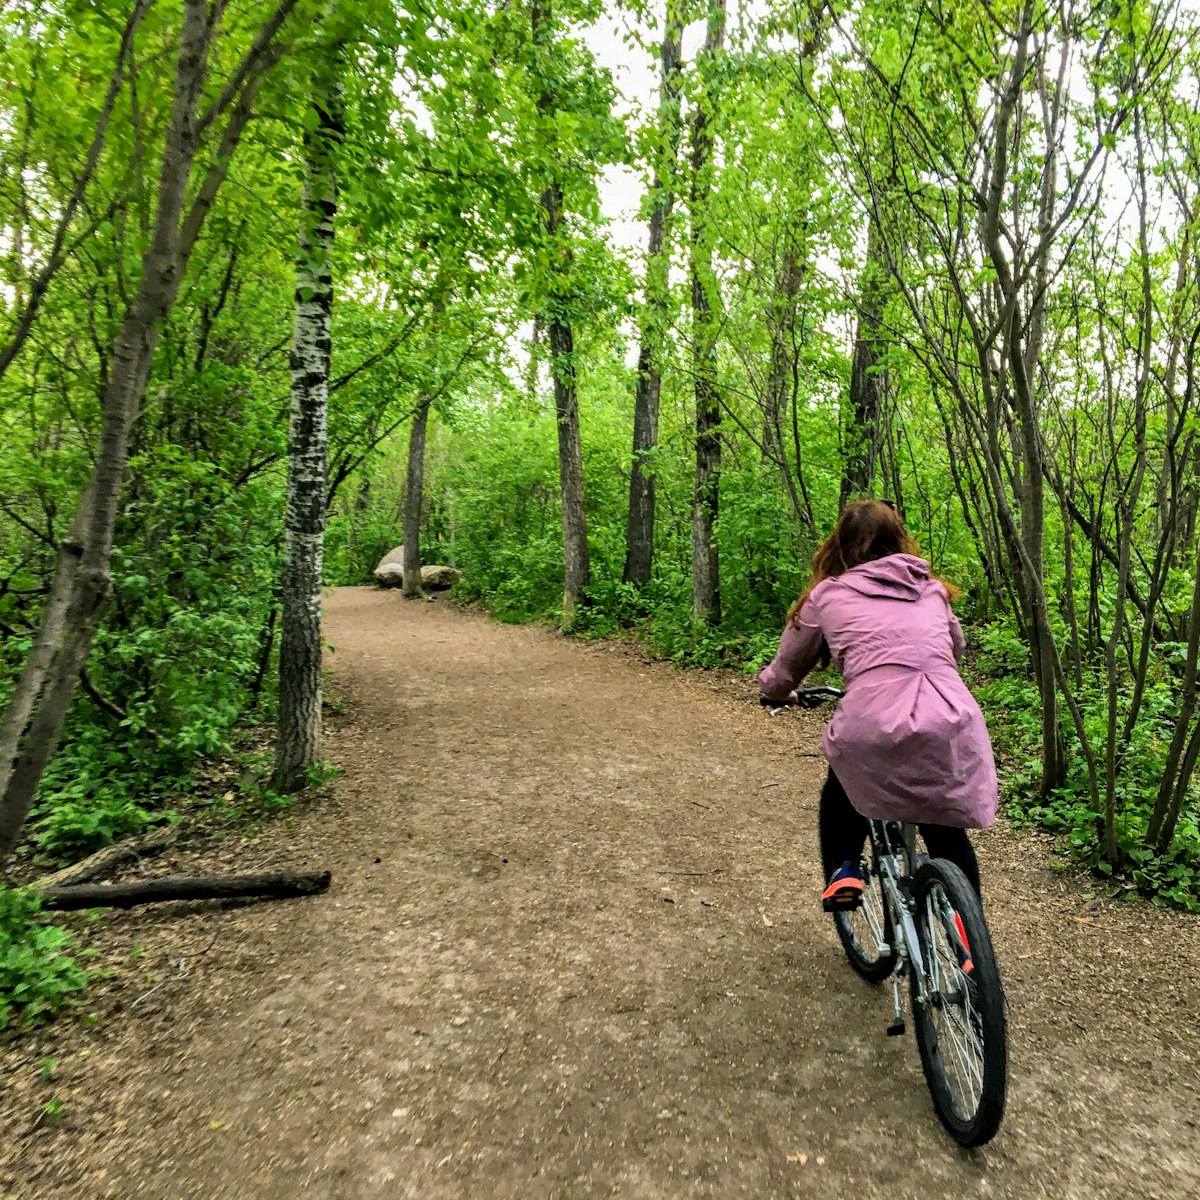 A photo of a woman enjoying a nice bike ride through the forest on a beautiful spring evening in the river valley of Edmonton, Alberta, Canada.
1238818056
active, alone, beautiful, bike, biking, cycle, cyclist, exploring, female, girl, healthy, leisure, lifestyle, outdoor, park, path, person, photo, pretty, quiet, ride, river valley, scenery, scenic, trail, trees, woman, young